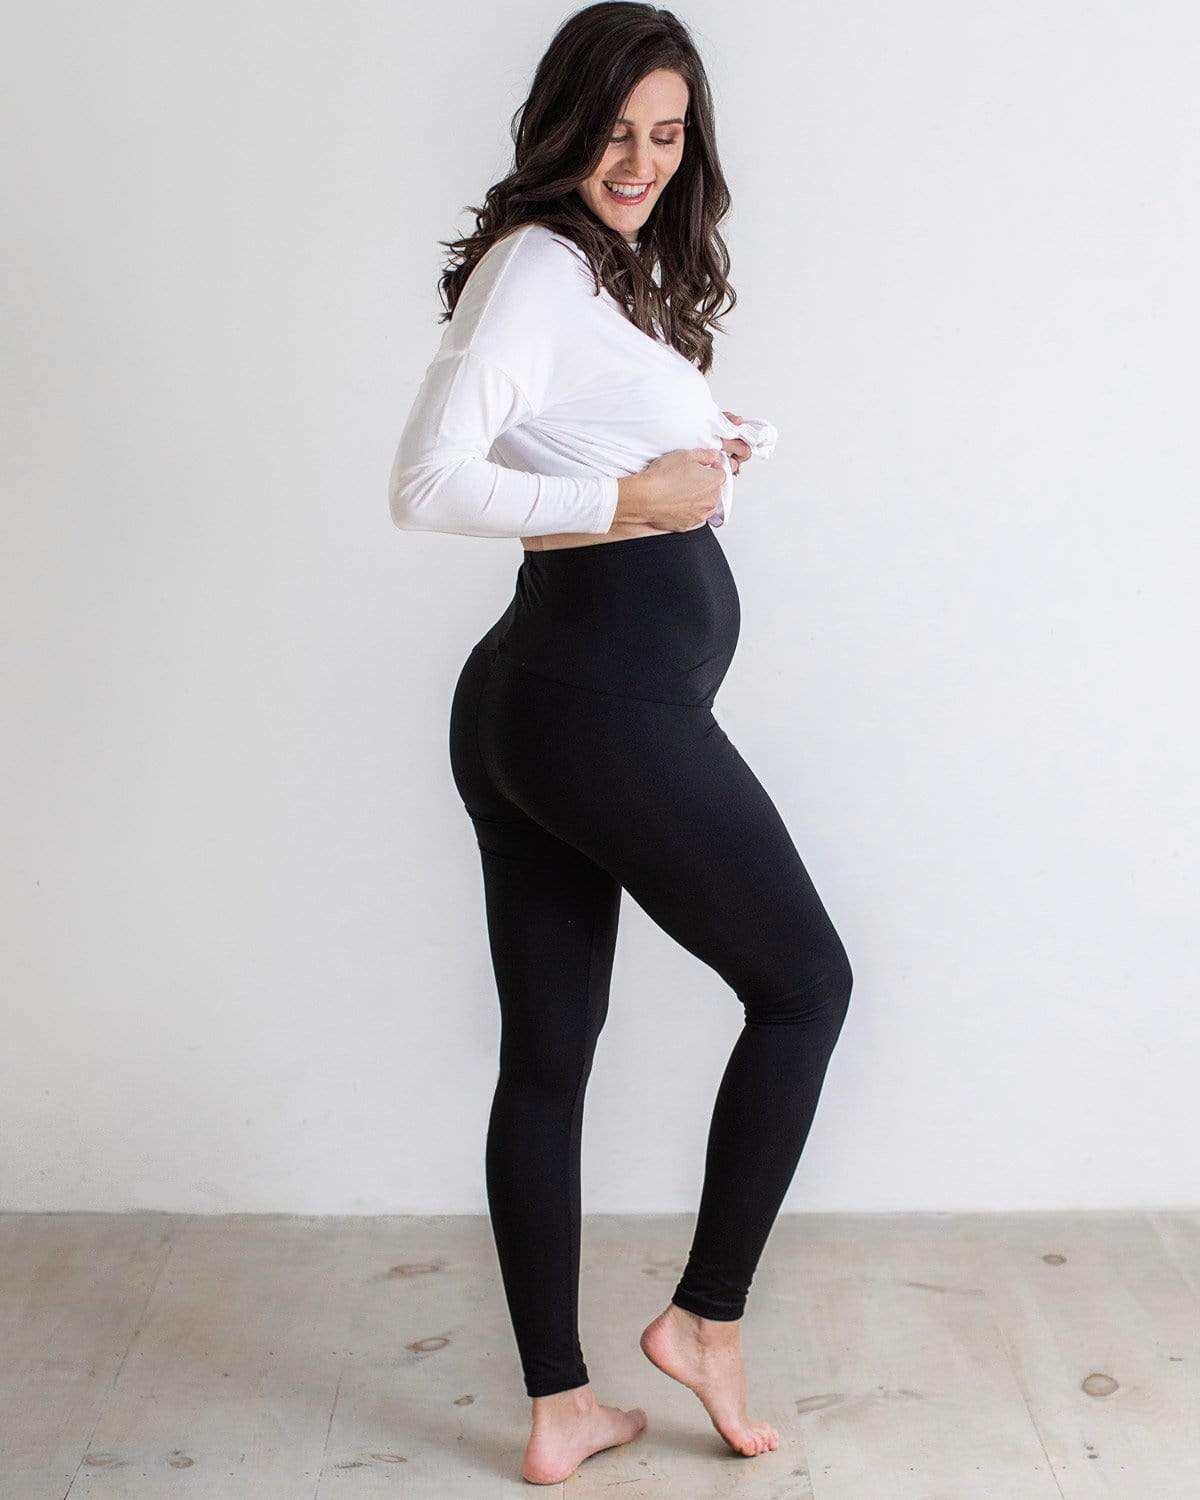 Women's Maternity Pants Comfy Lounge Workout Jogger Pants Track Cuff  Sweatpants Over The Belly Stretchy Pregnancy Pants - Walmart.com